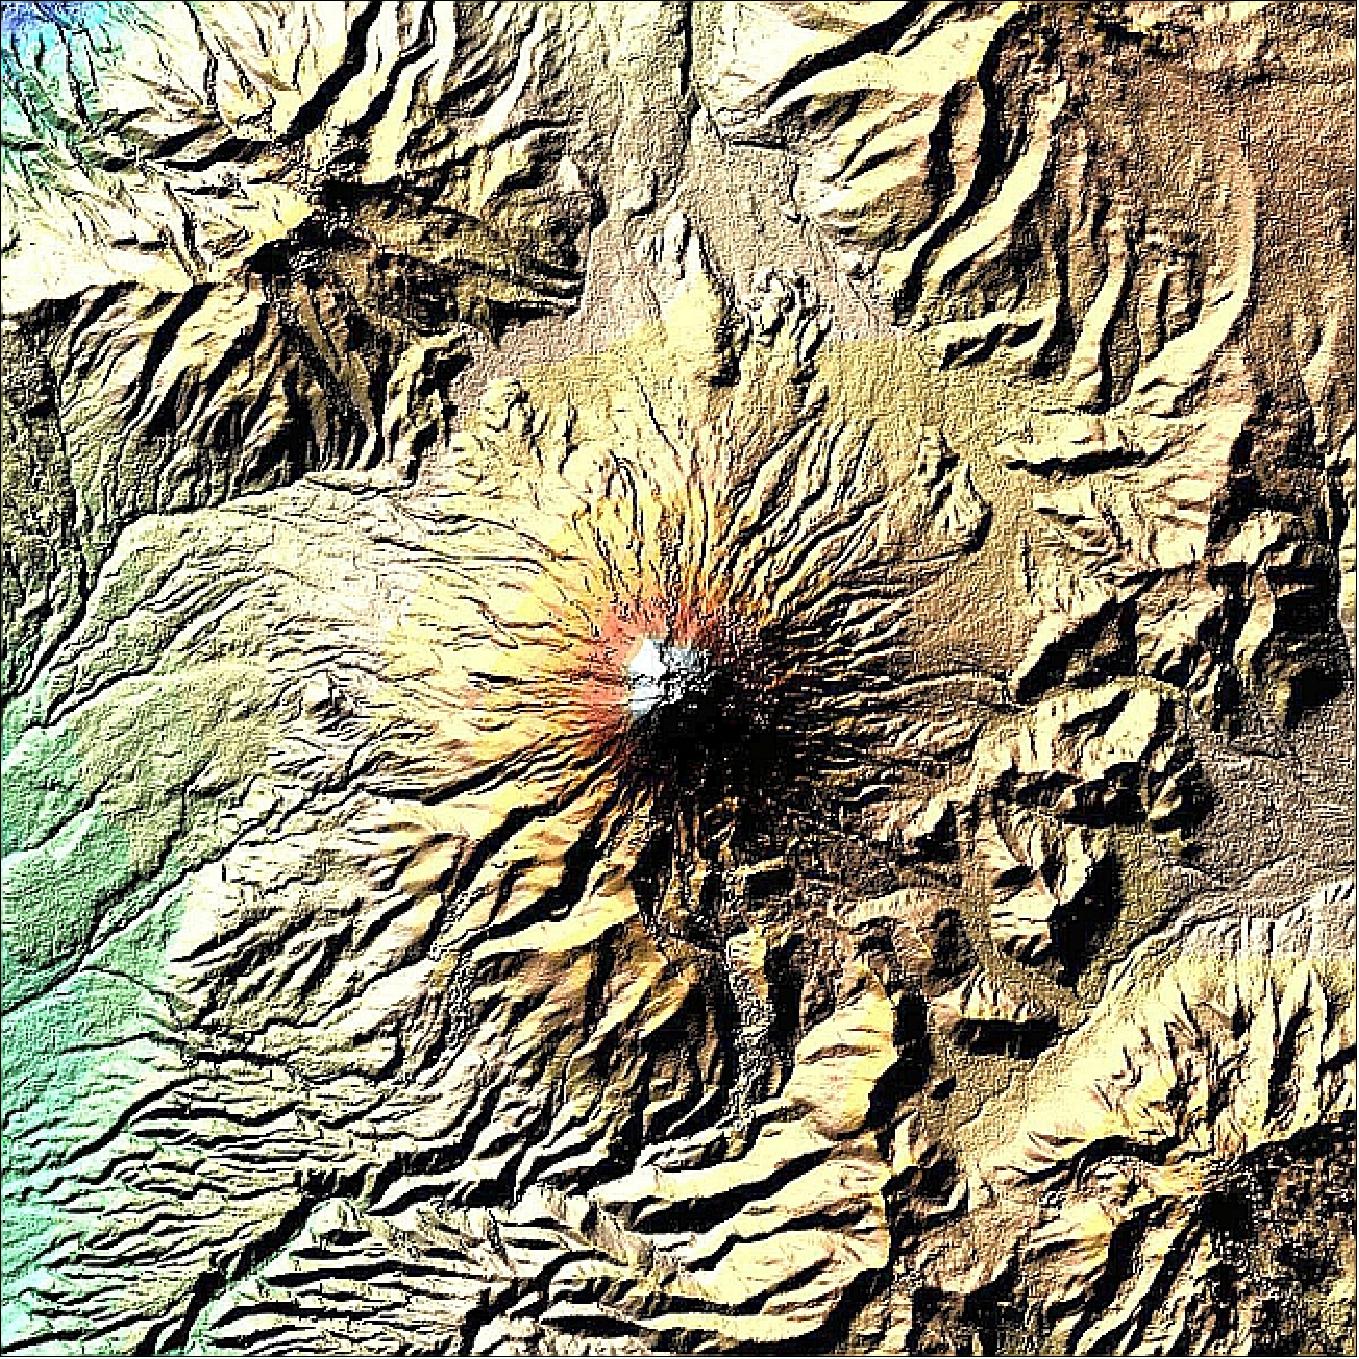 Figure 14: The X-SAR/SRTM digital elevation model shows Mt. Cotopaxi in Ecuador, the highest active volcano in the world (image credit: DLR, NASA)